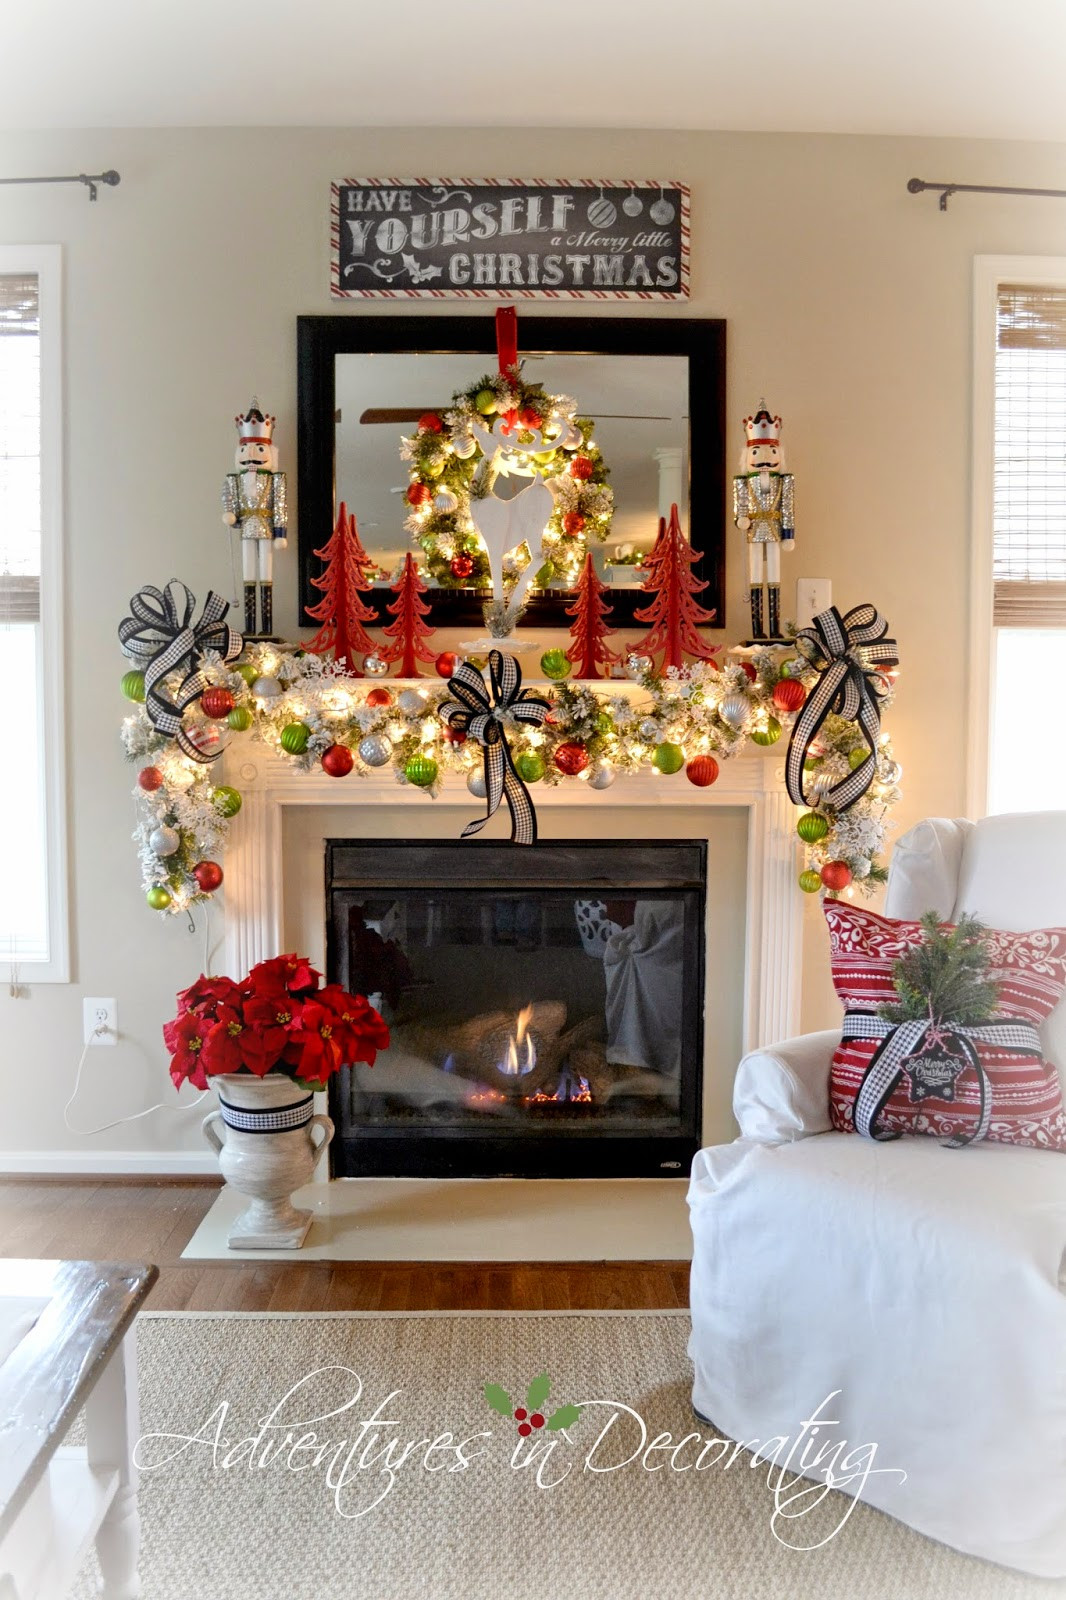 Decorating Fireplace For Christmas
 Adventures in Decorating Our 2014 Christmas Mantel and